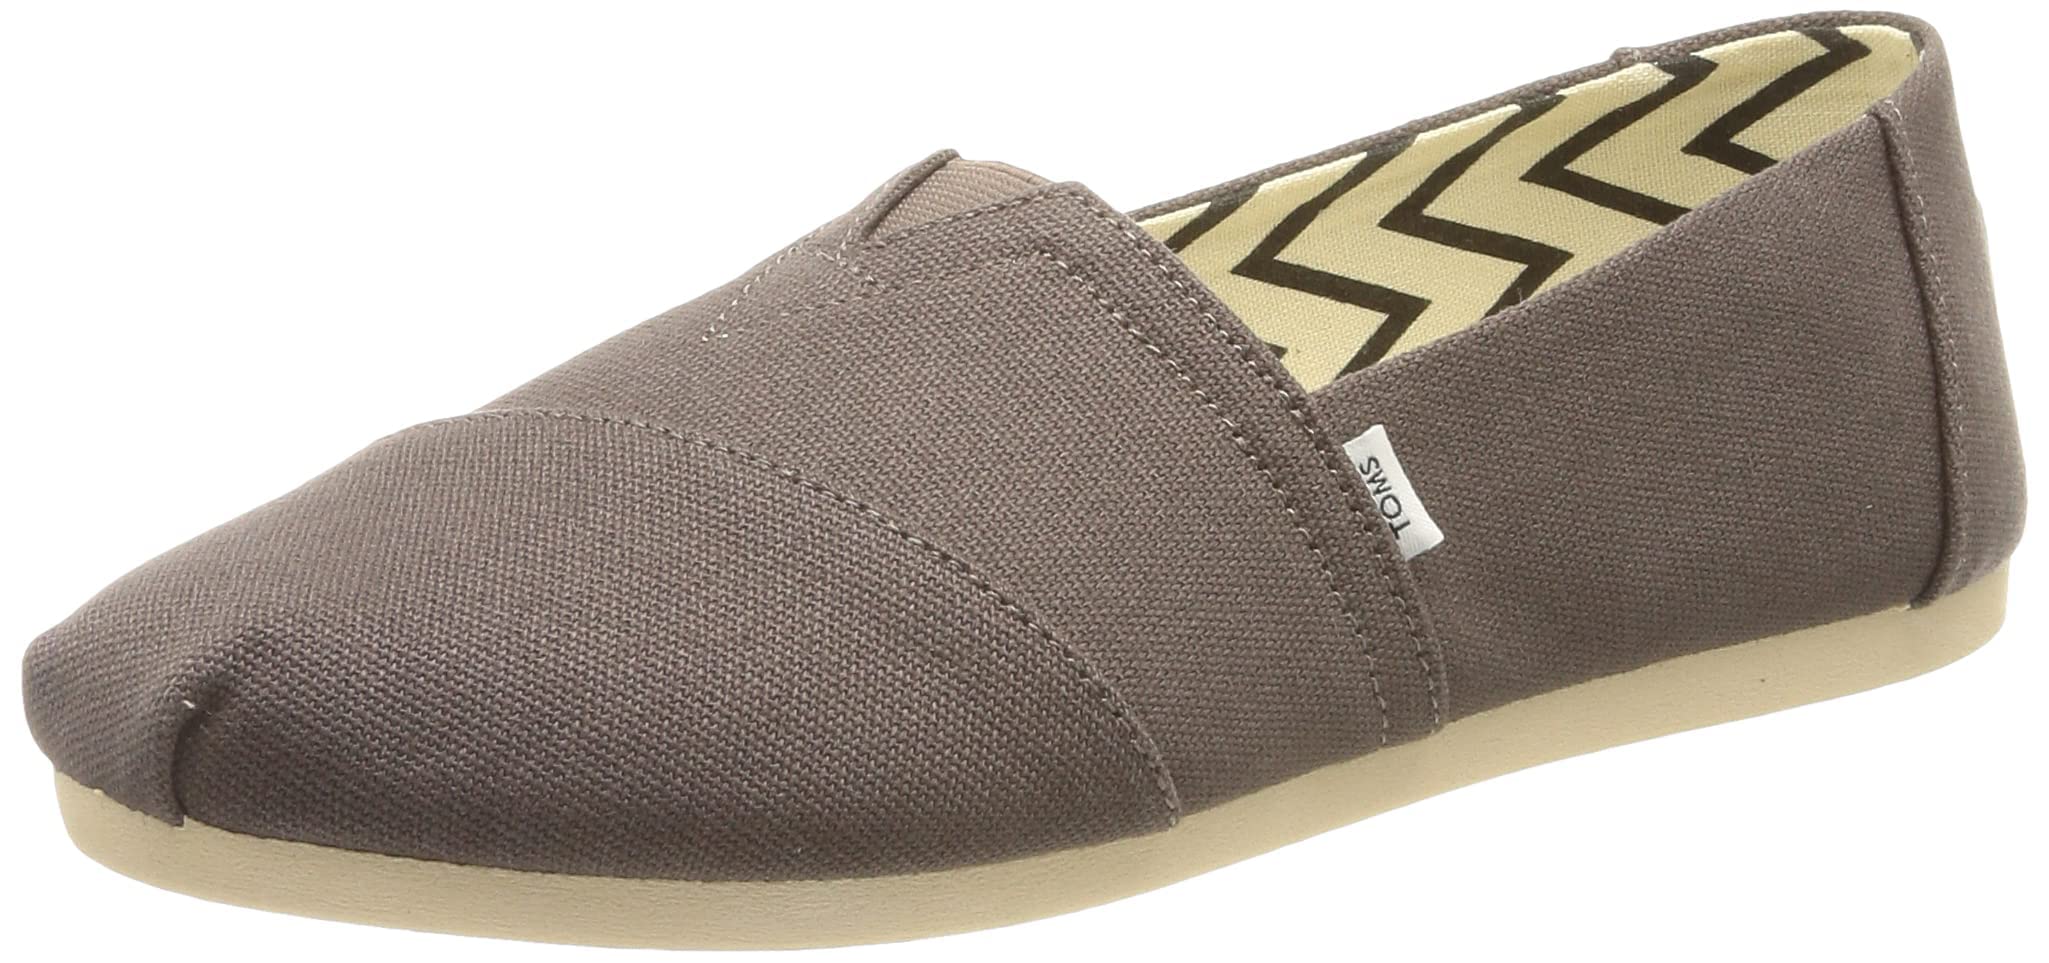 TOMS Women's, Alpargata Recycled Slip-On - Wide Width